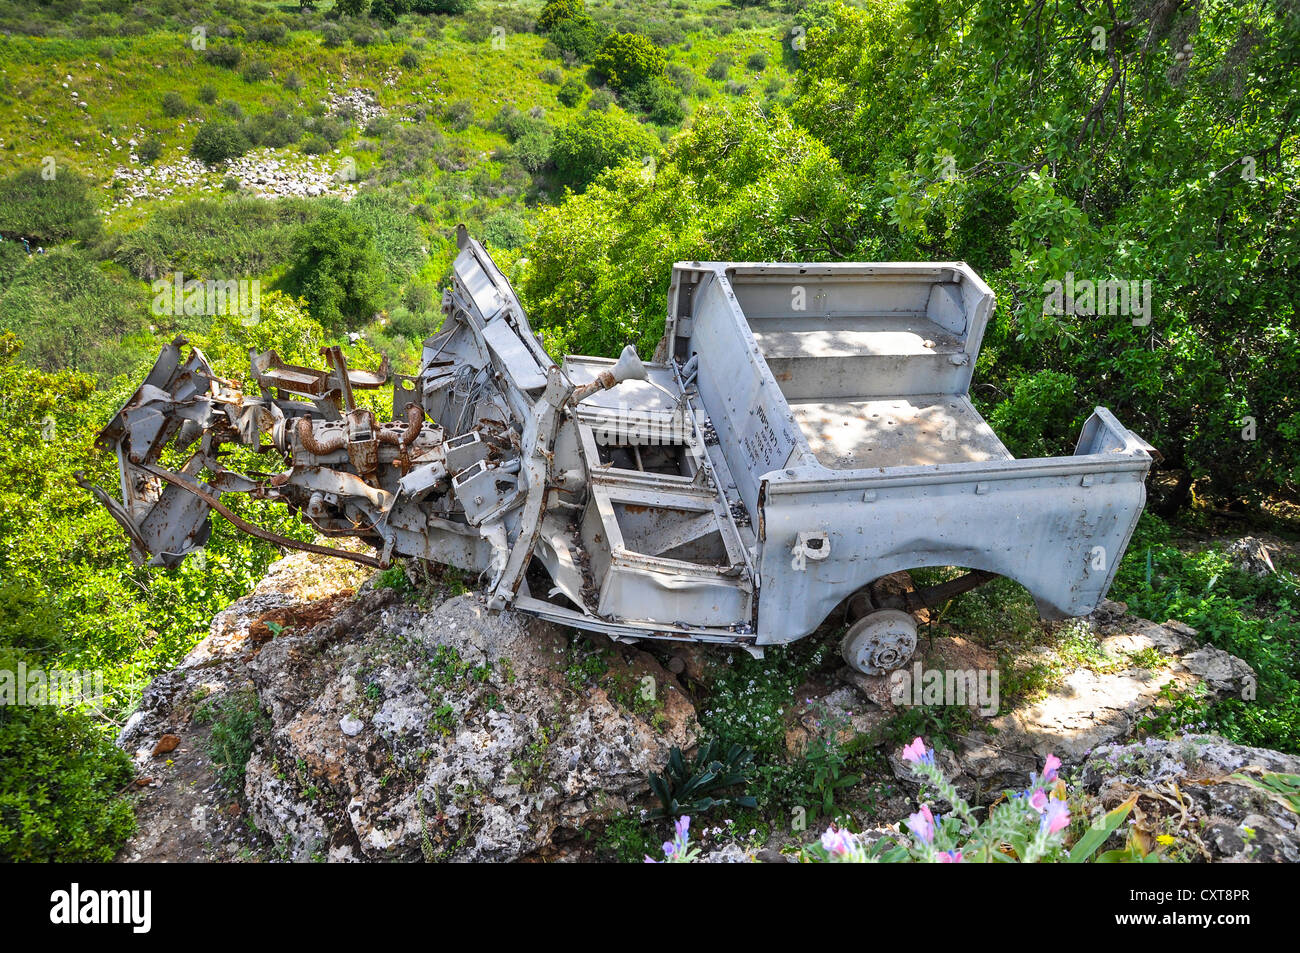 Wreckage of an all-terrain vehicle as a memorial to the Six Day War, Banyas, Banias or Banjas Nature Reserve, Israel Stock Photo